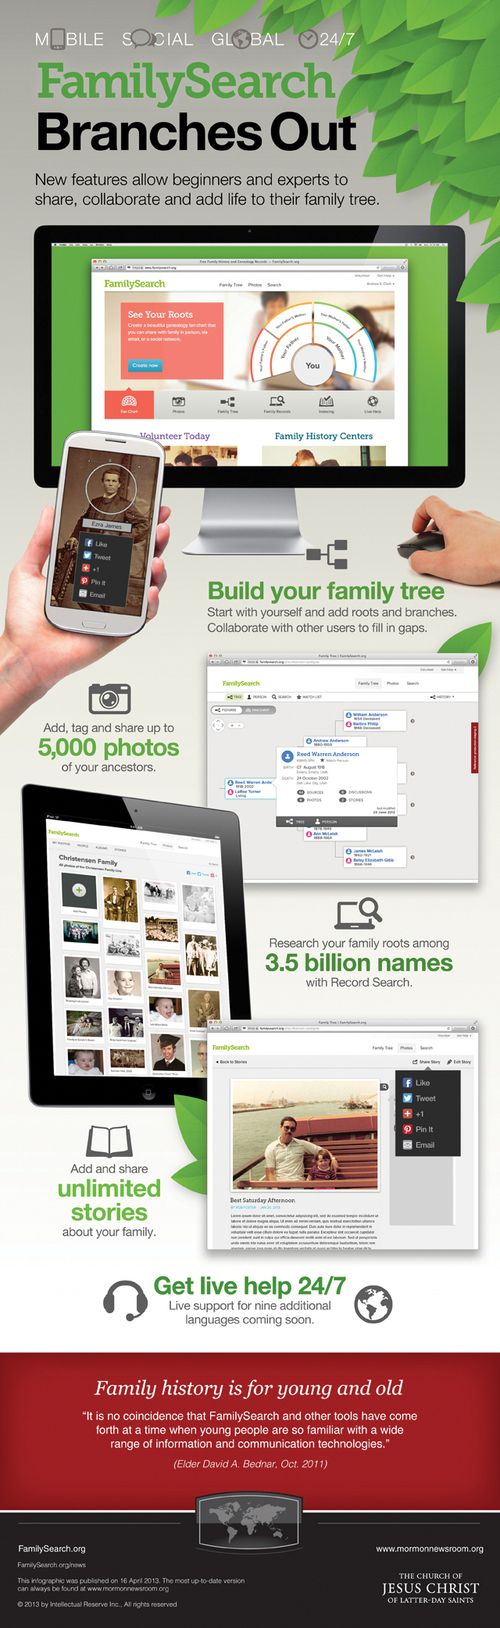 An infographic with green leaves that describes the new features provided by FamilySearch for building a user's family tree, such as more photos, billions of names, and live help 24/7.